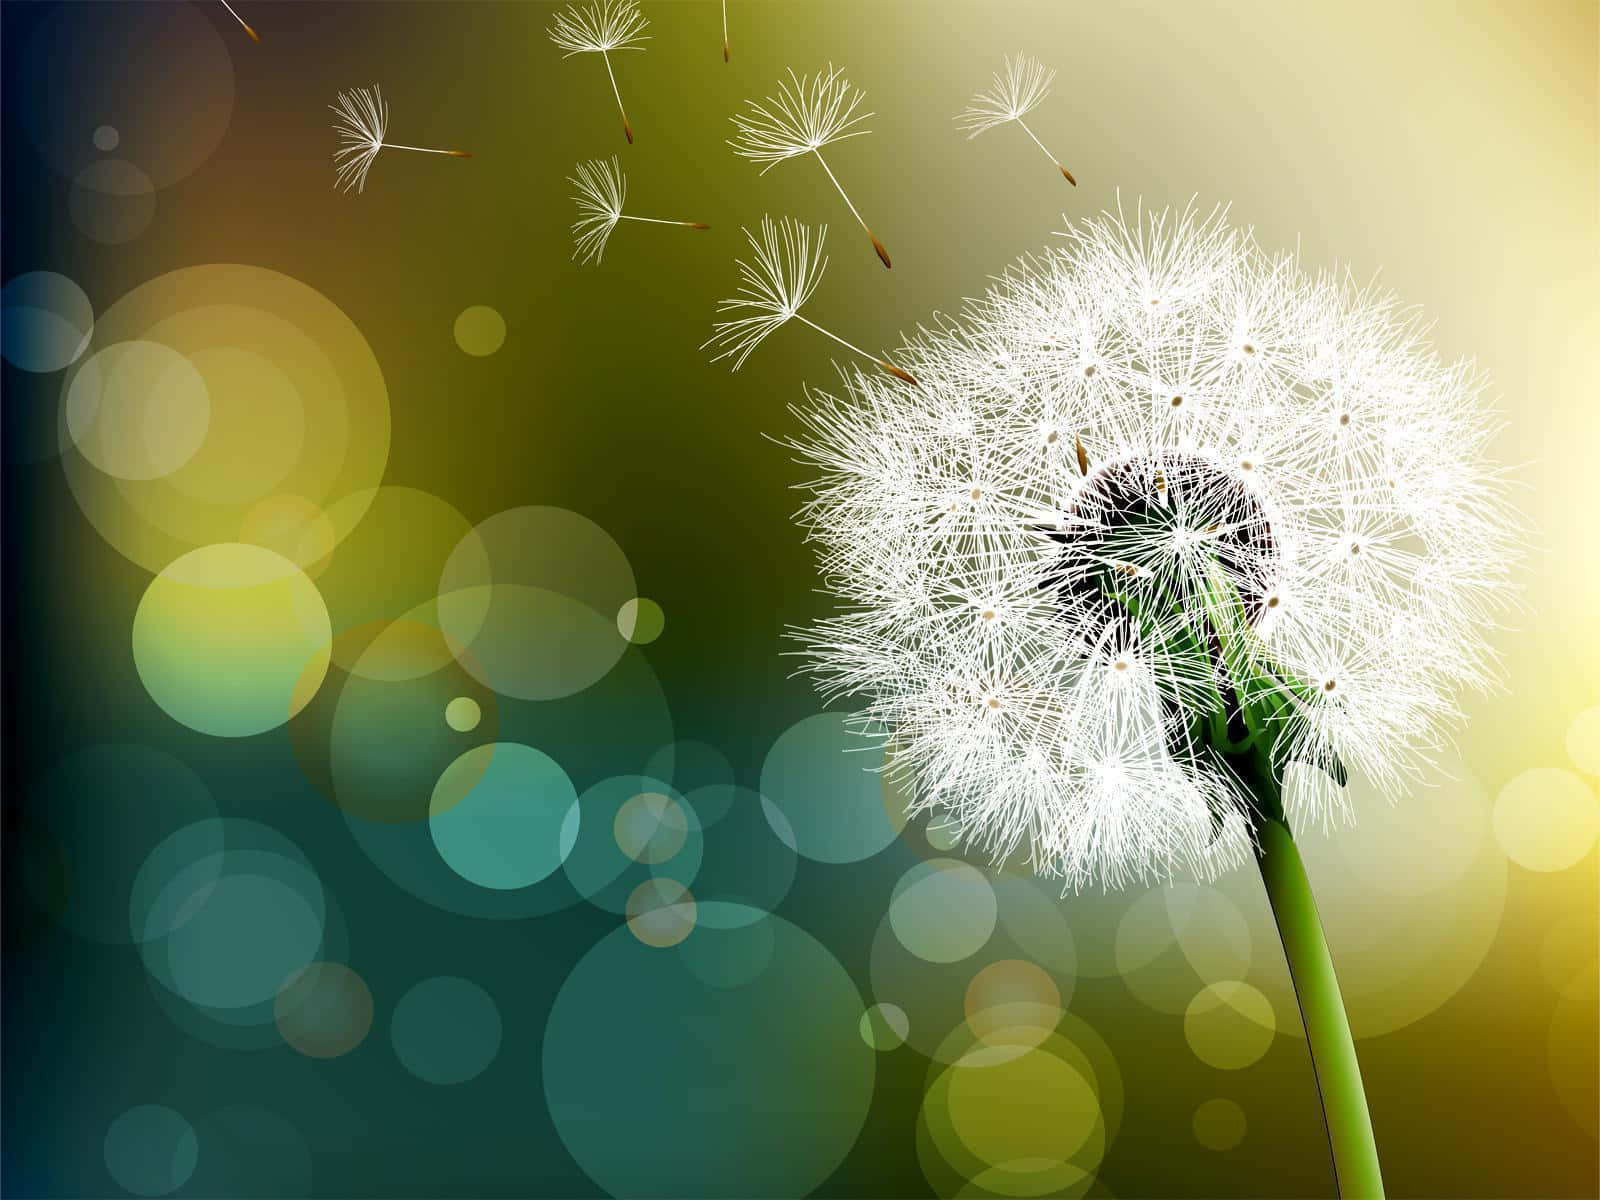 Stunning Dandelion Close-Up with Vivid Colors